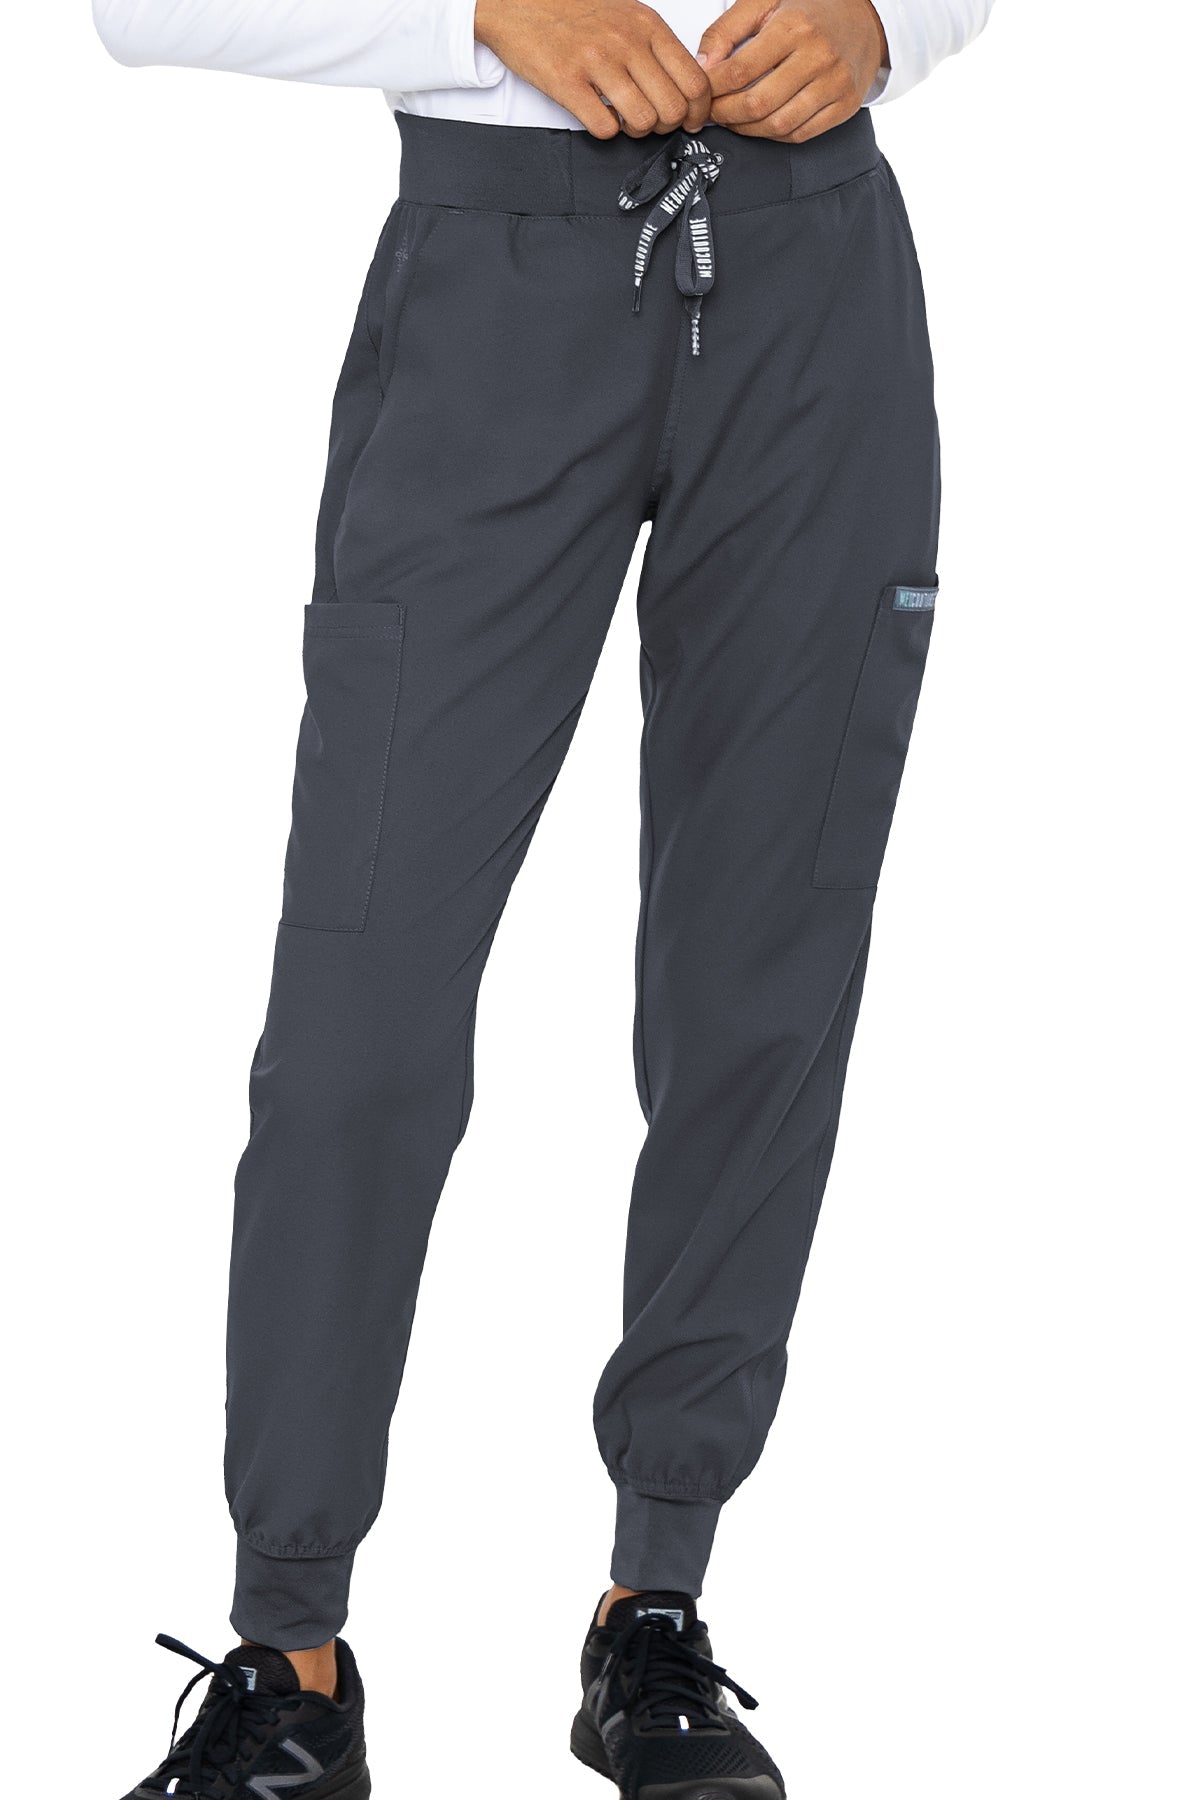 Med Couture Petite Scrub Pants Insight Jogger Pant in Pewter at Parker's Clothing and Shoes.